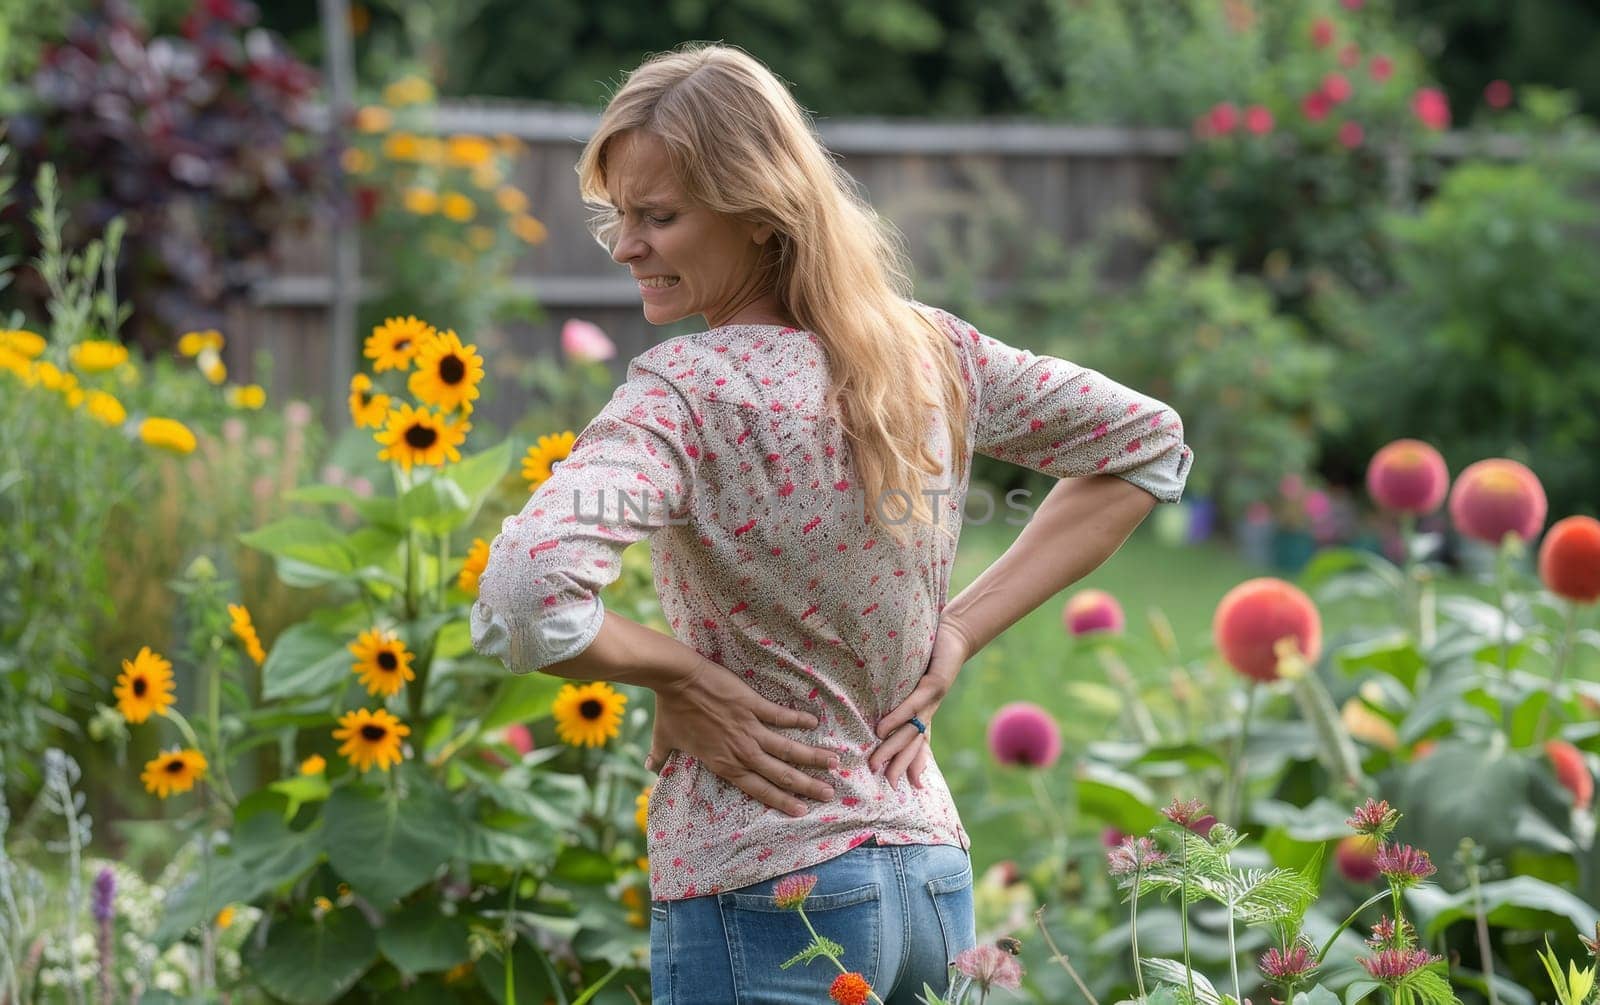 A woman grimaces in pain, clutching her back amidst a burst of garden blooms. The tension in her posture contrasts with the tranquil setting of her colorful, flower-filled environment.